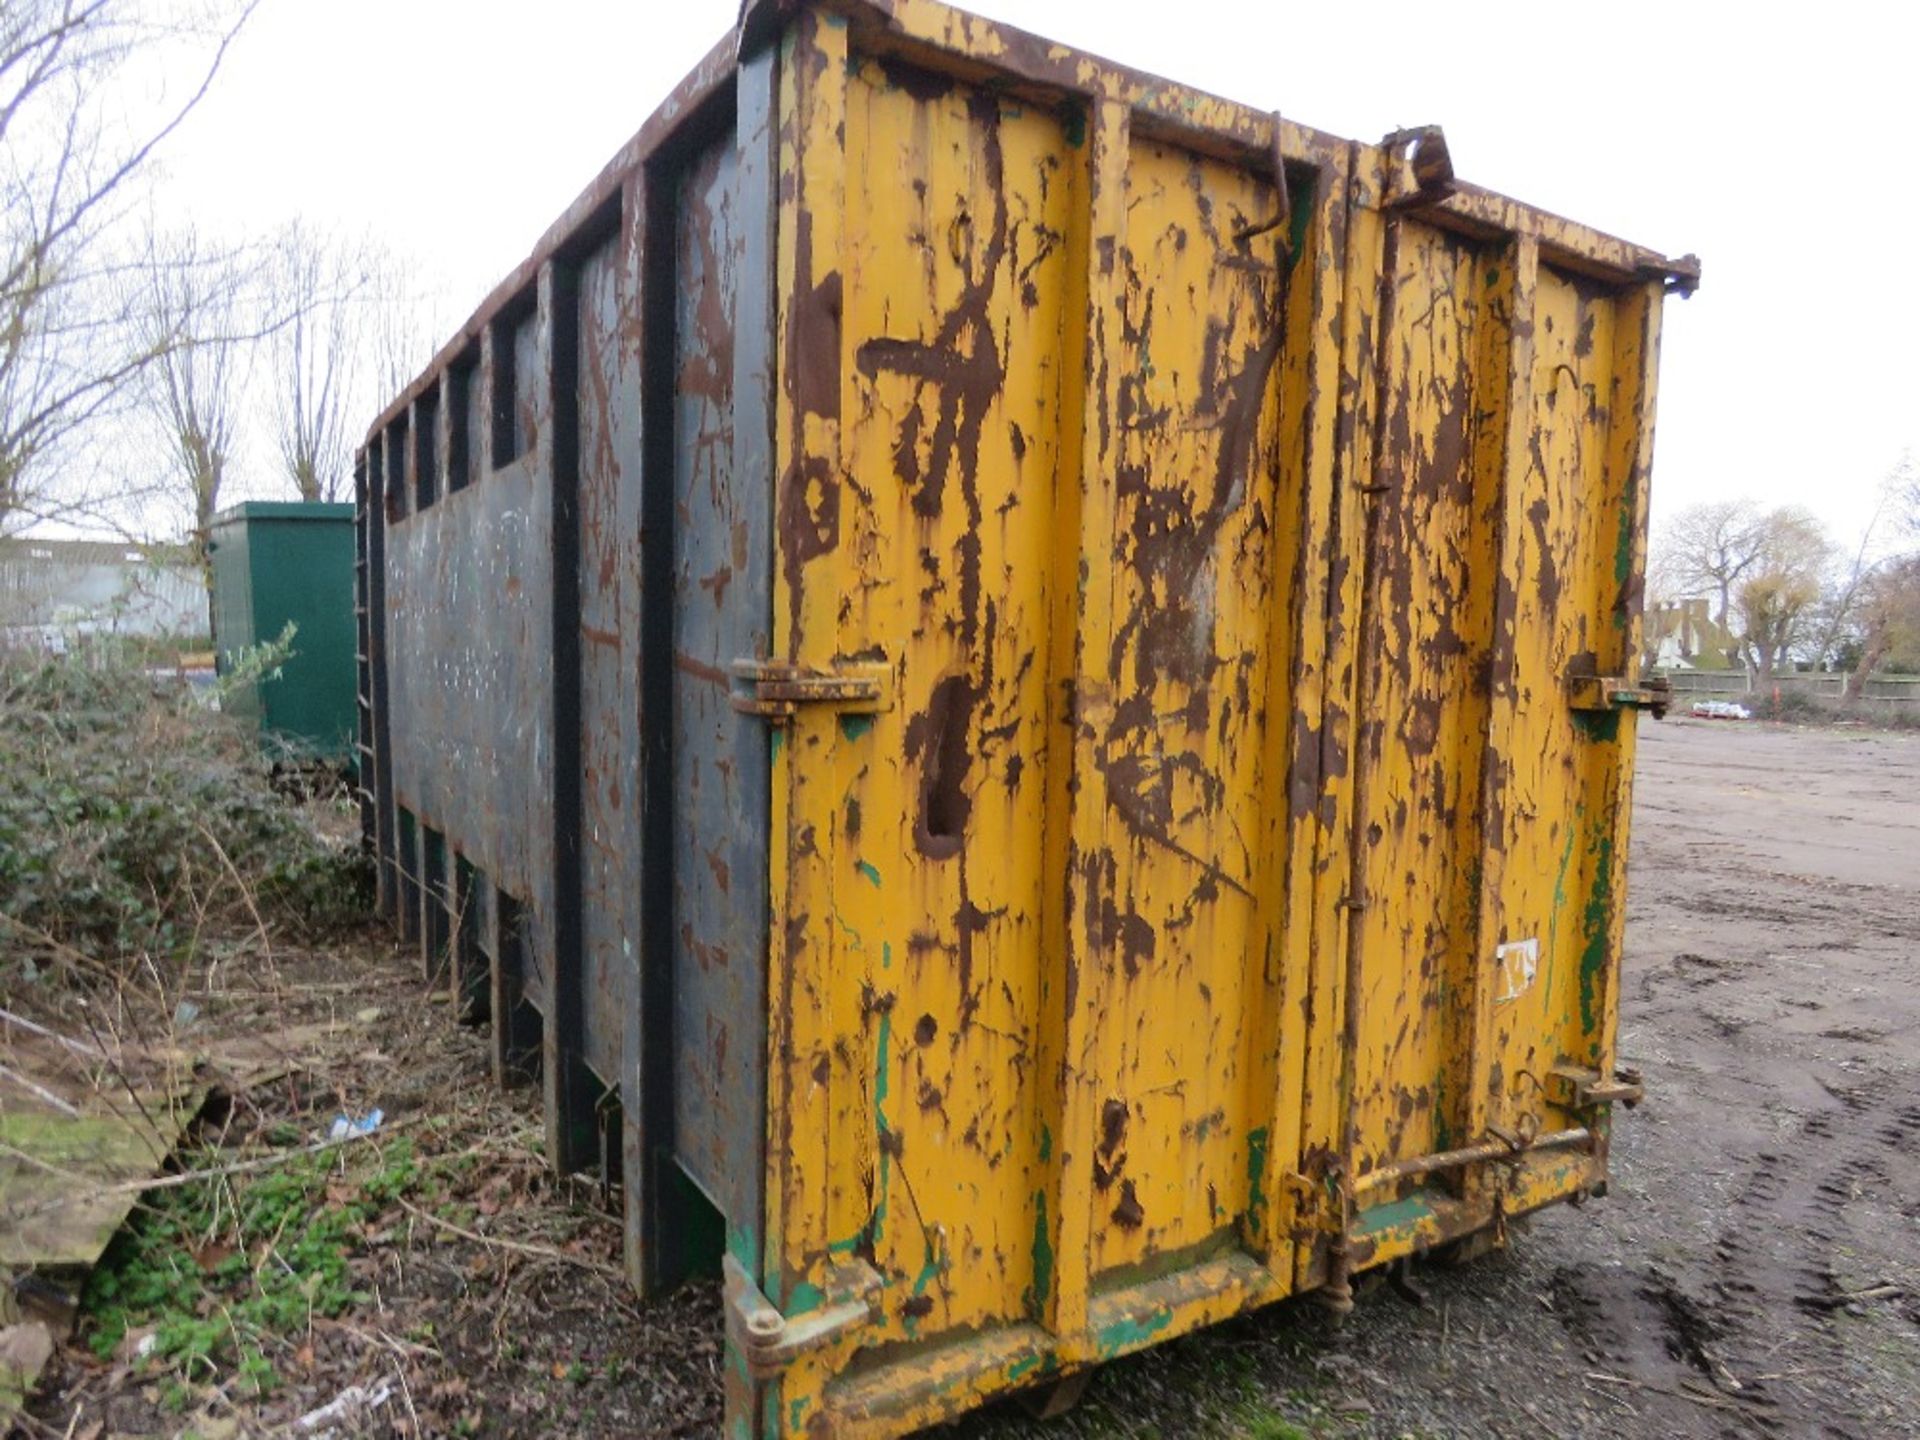 HOOK LOADER 40 YARD ROLLONOFF TYPE WASTE CONTAINER BIN, SOURCED FROM DEPOT CLOSURE. - Image 5 of 7